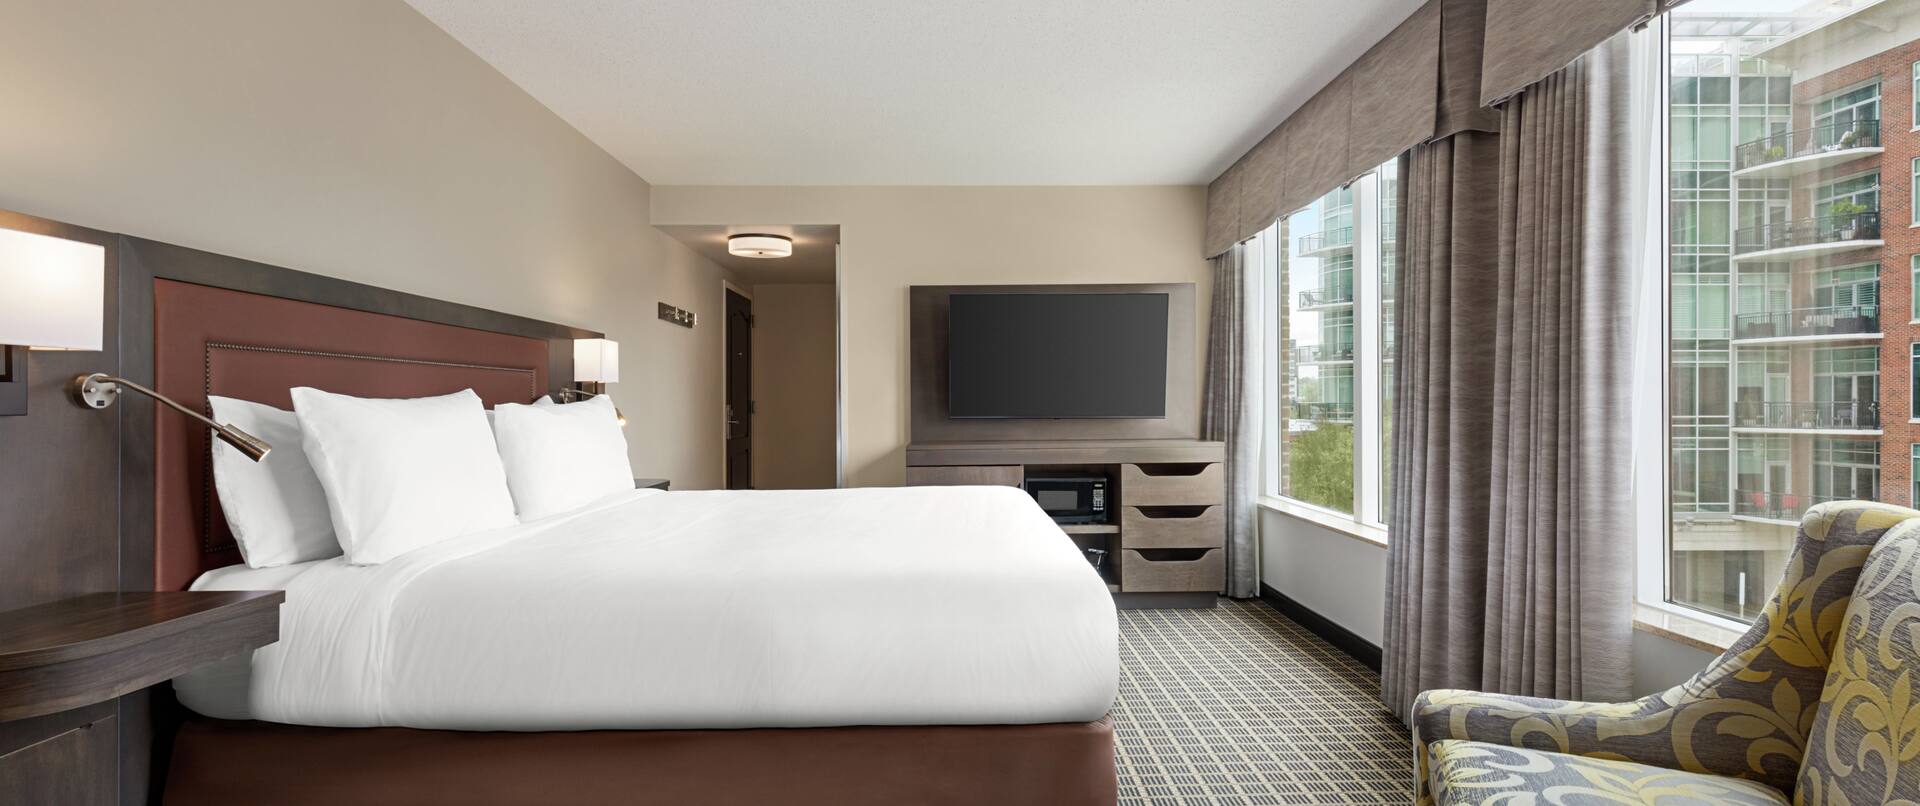 Spacious guestroom featuring comfortable king bed, TV, and beautiful city view.